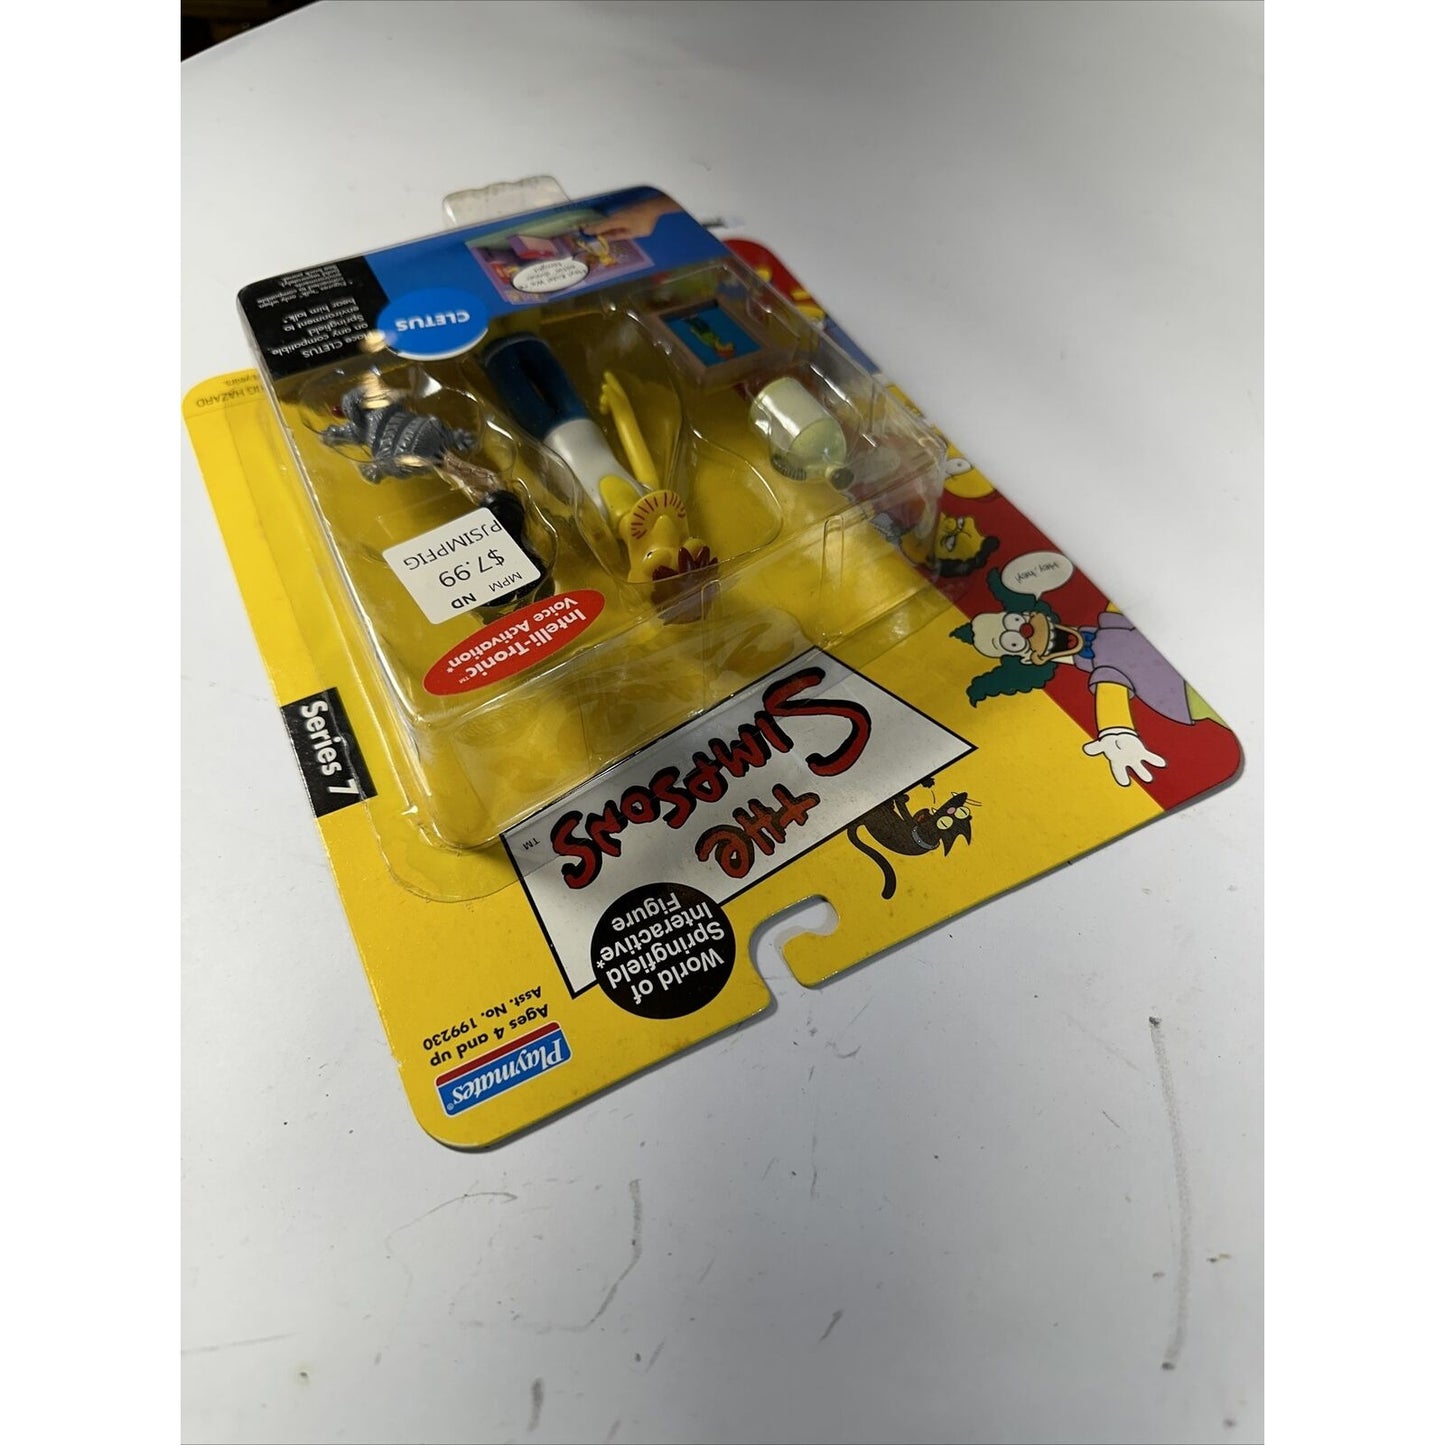 The Simpsons Cletus Series 7 World of Springfield Action Figure Playmates